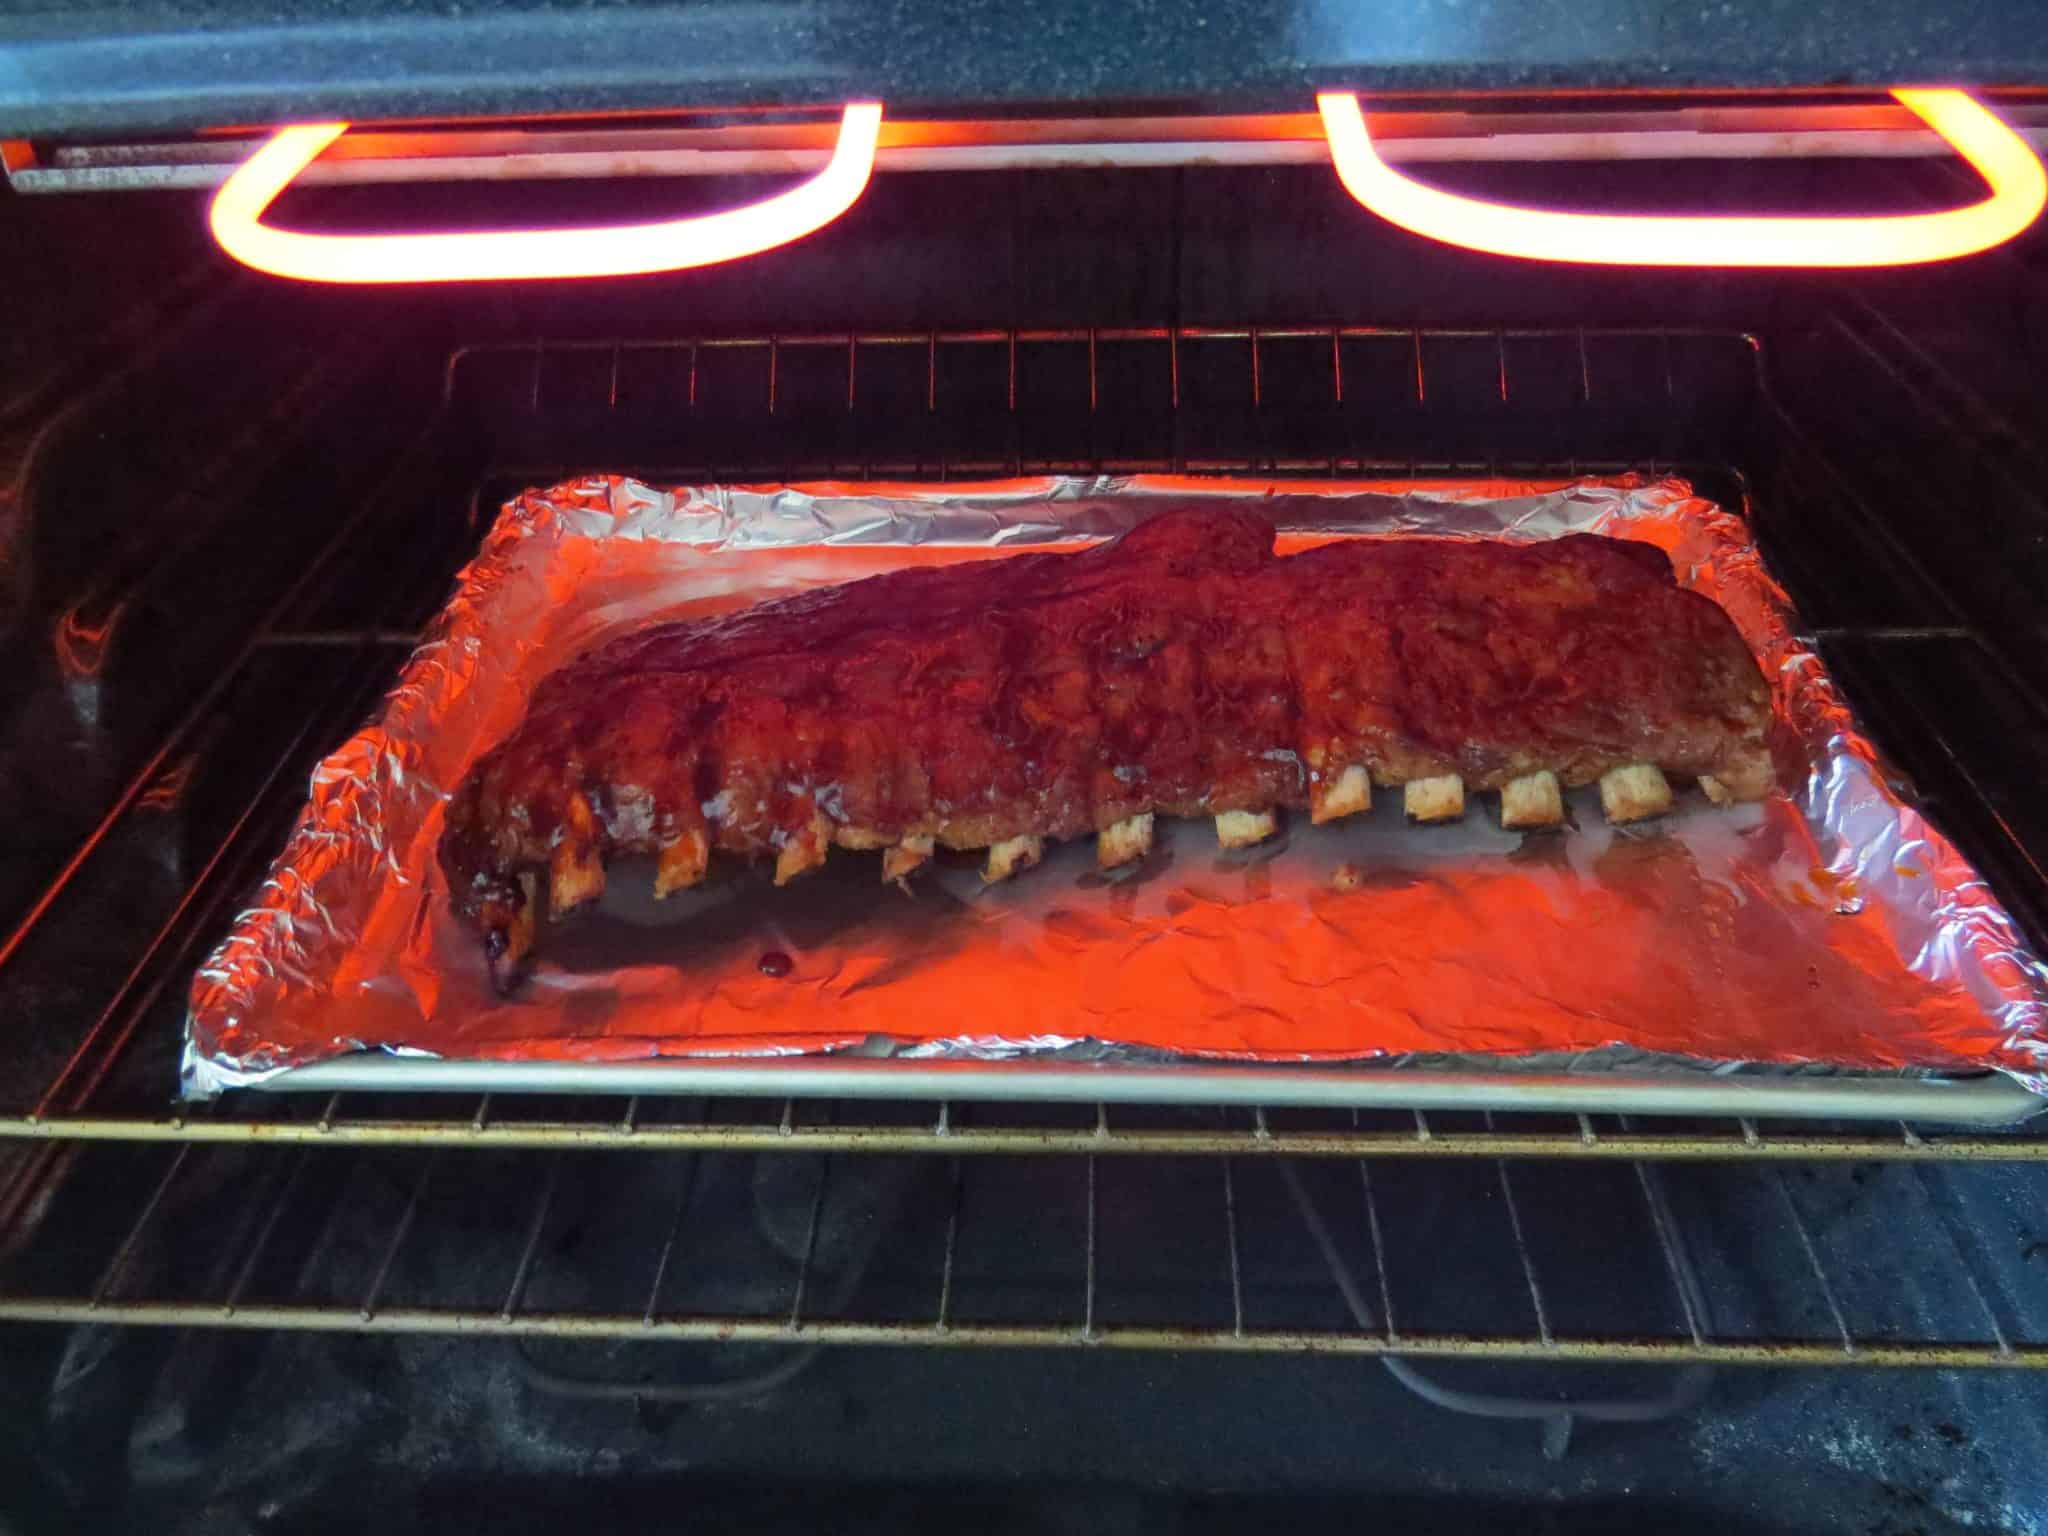 slow cooked baby back ribs on a heat pan under the oven broiler.